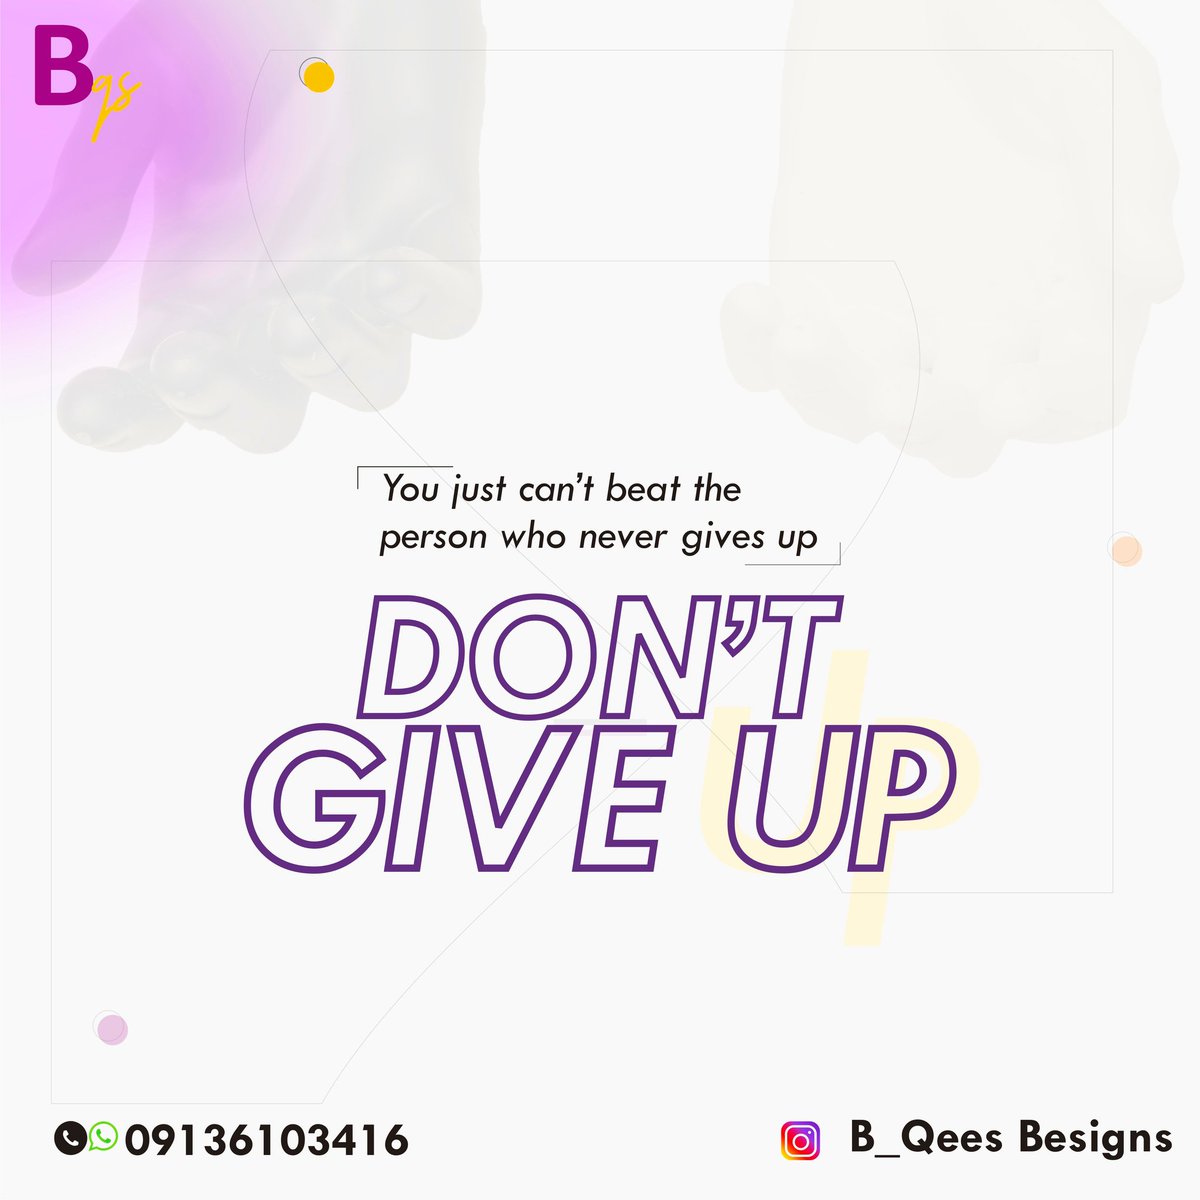 Why start, when you're going to give up so easily? It's another beautiful day to make things right. Keep the vibes positive and make your day productive as much as possible!!#wednesdayquotes #dontgiveup #positivevibes #creativeart #graphicdesign #beboldbecreativebeyou #LogoDesign